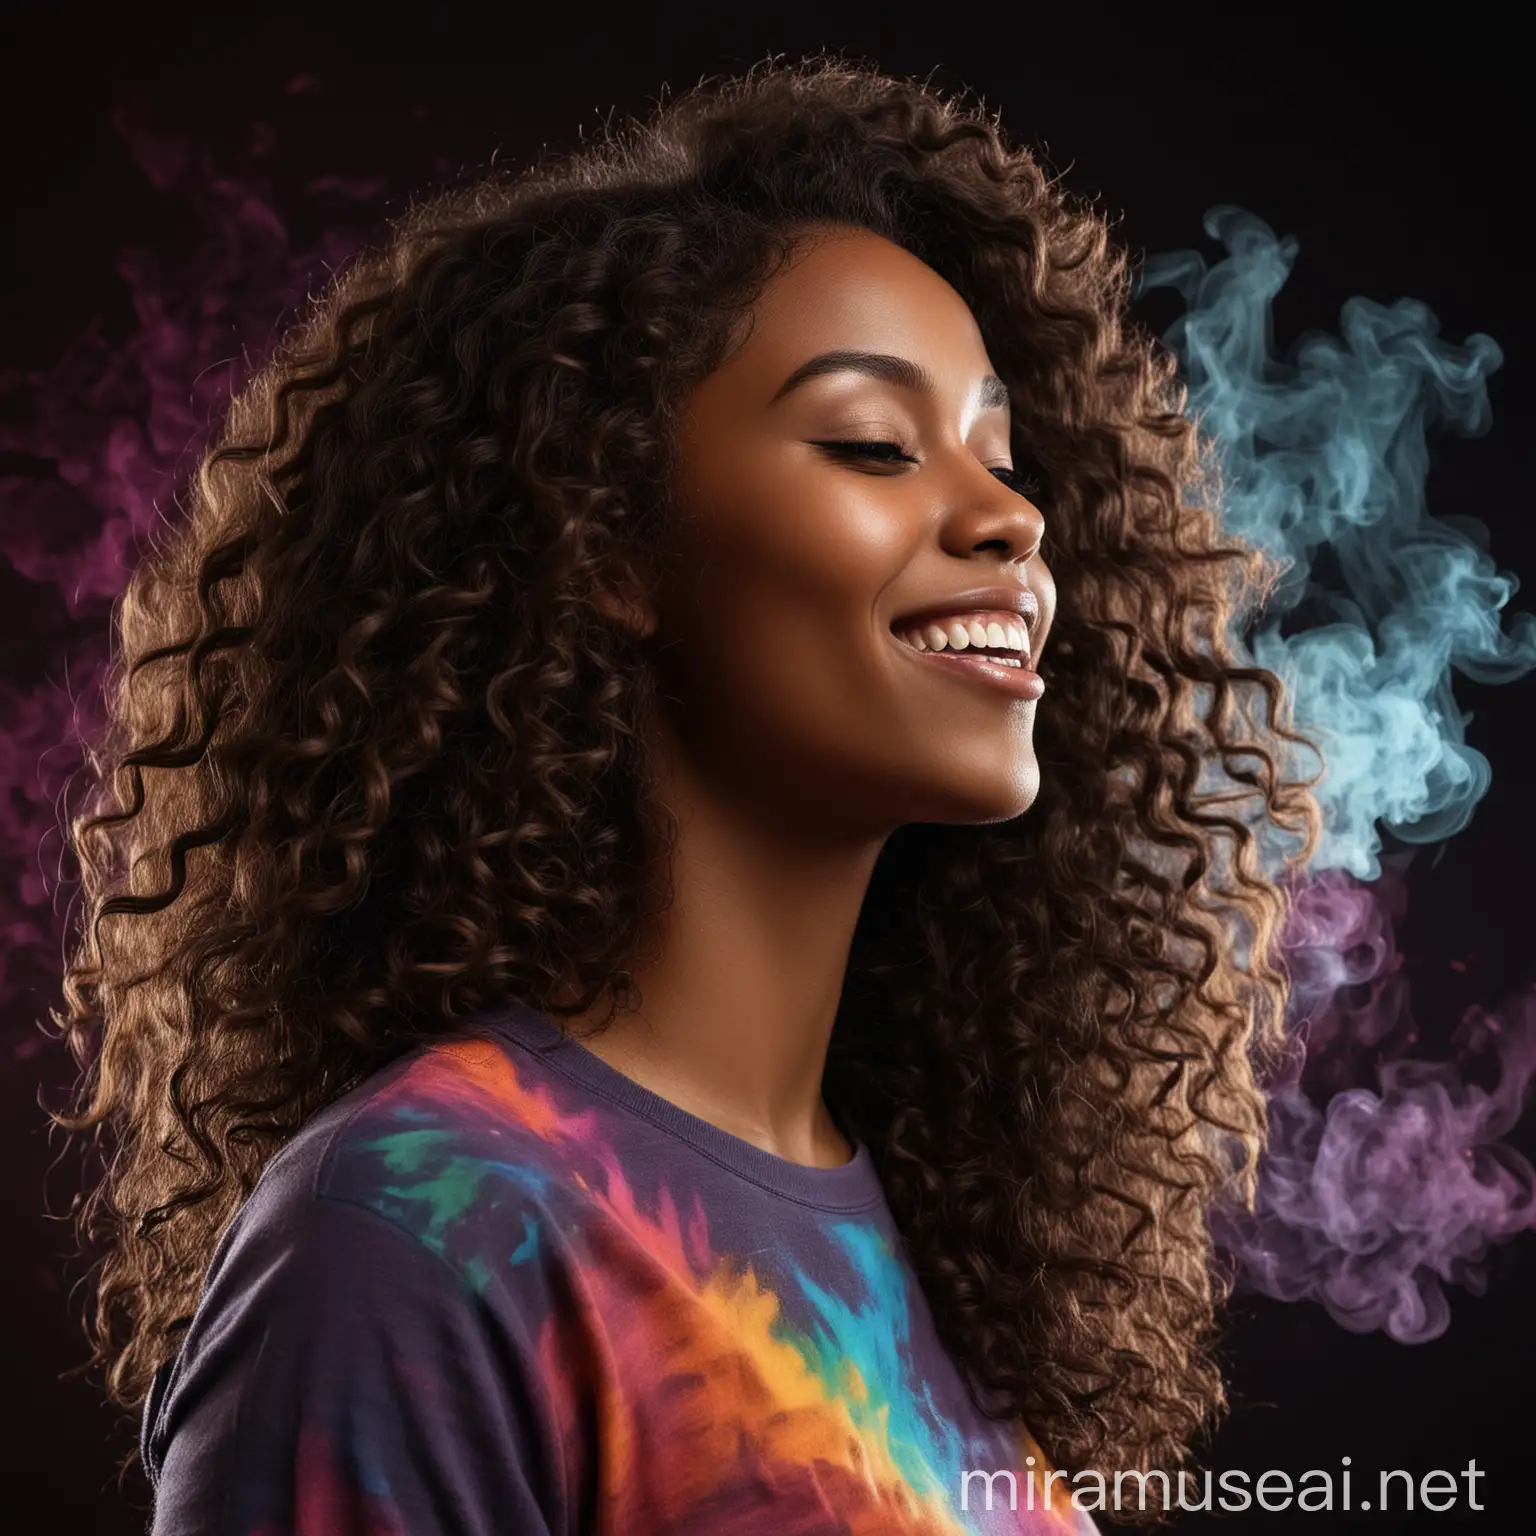 Silhouette Portrait of Smiling Woman with Curly Hair in Knit TShirt and Colorful Smoke Background